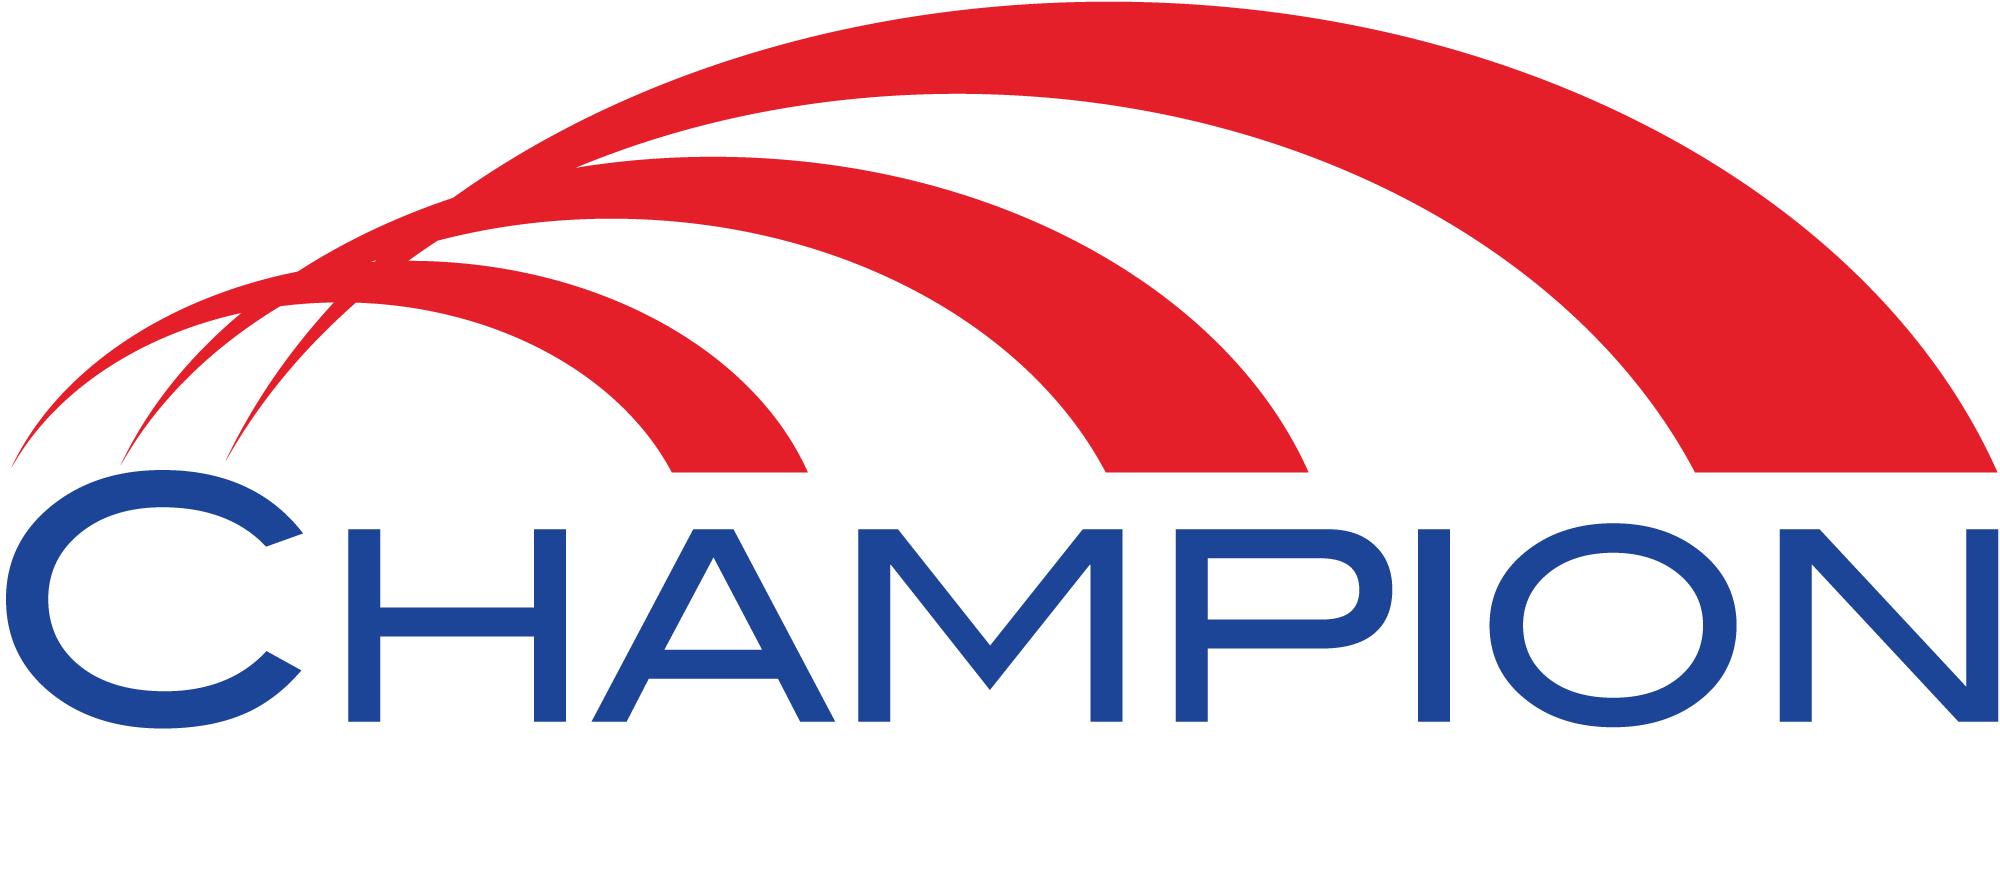 Champion Industries Logo - Champion Specialty Services